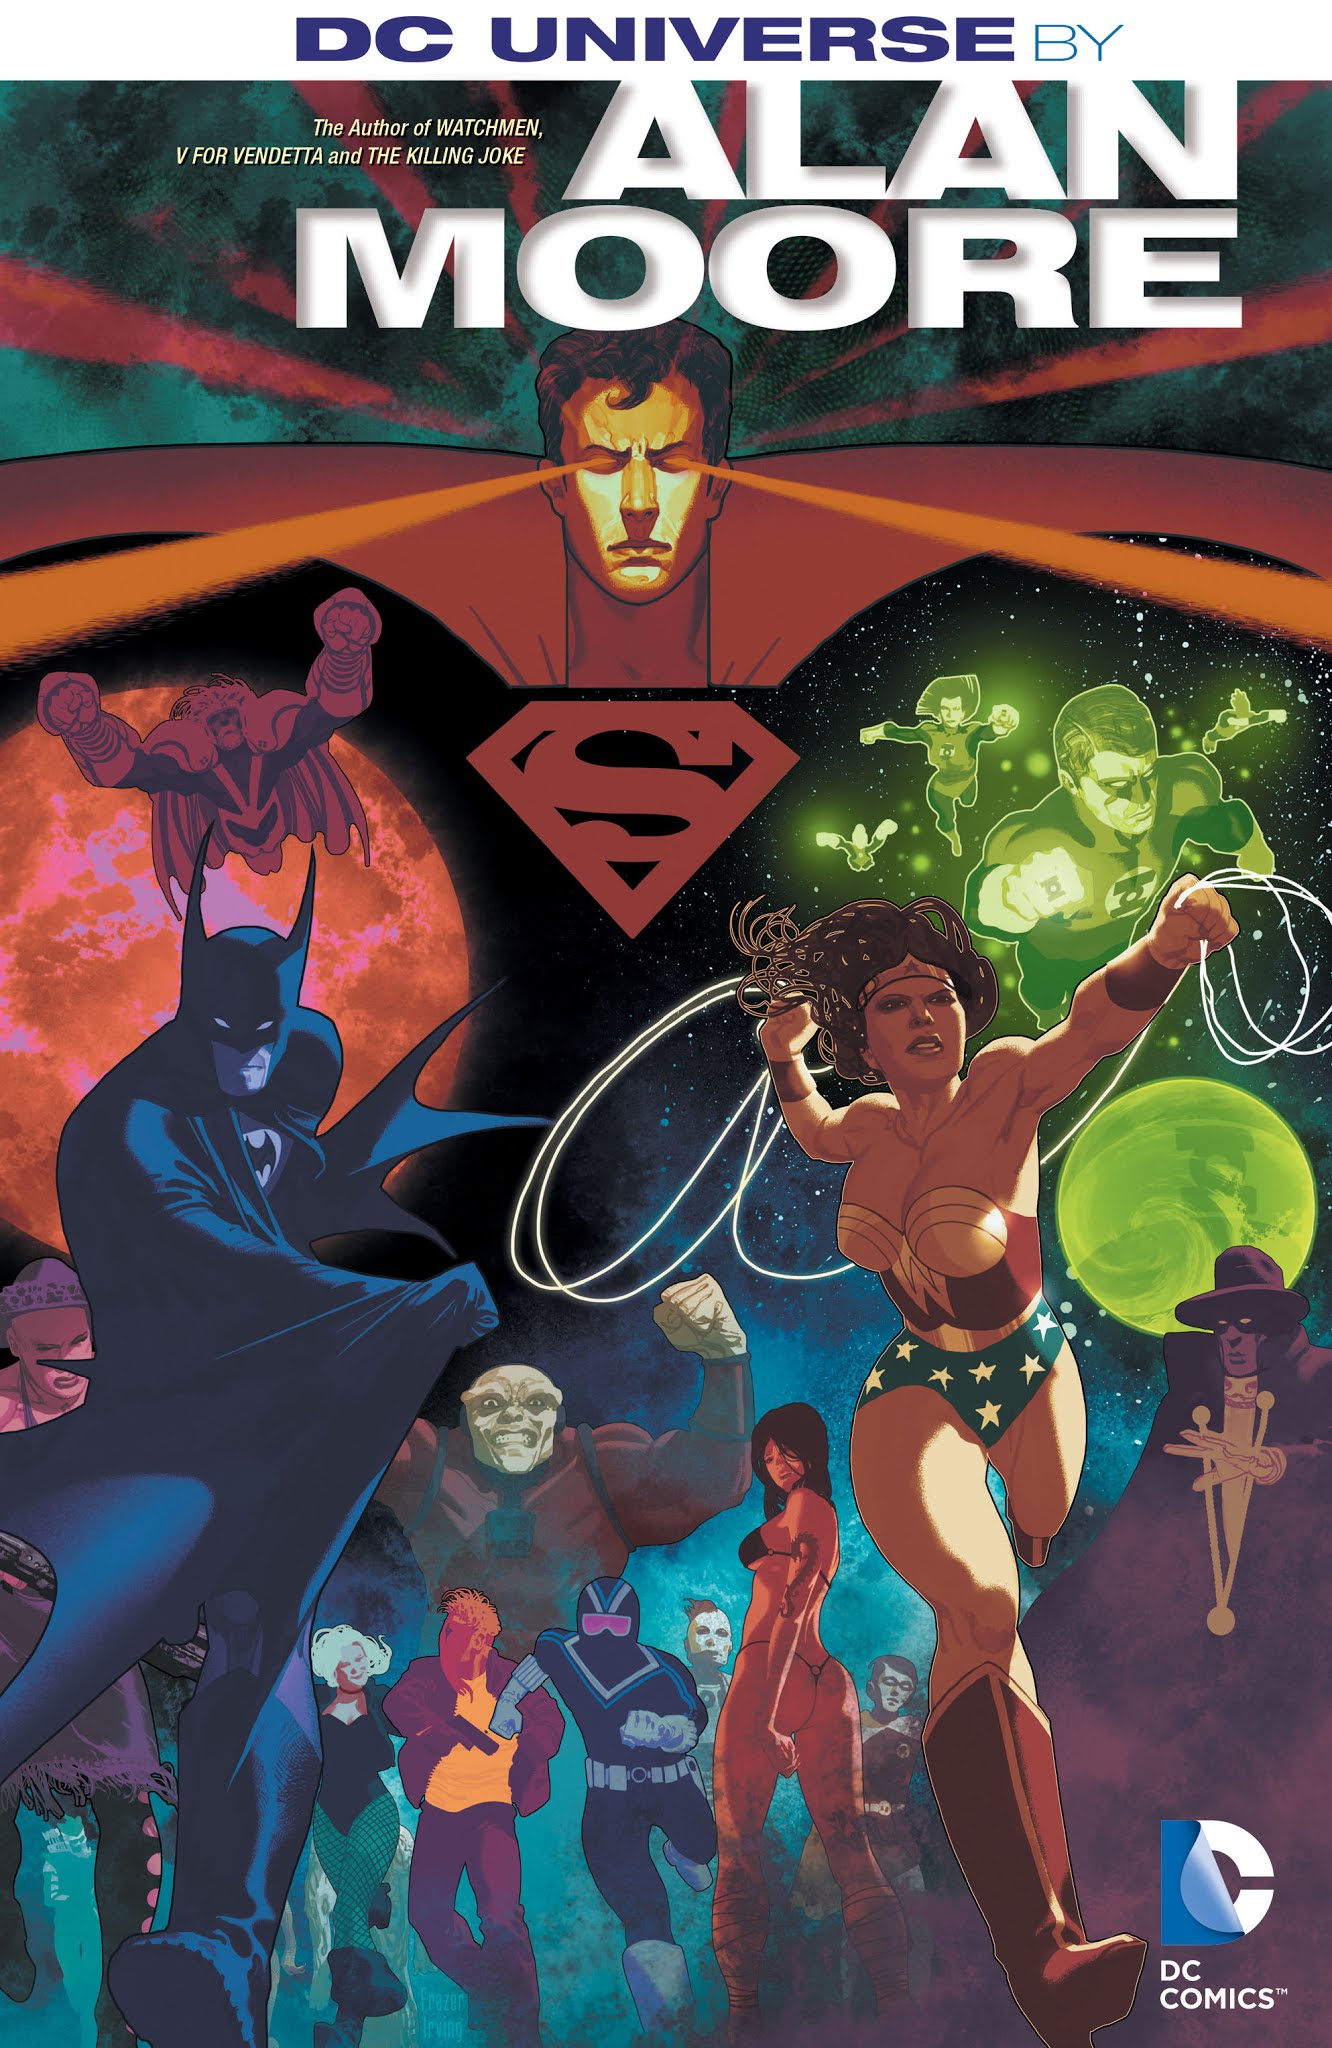 Read online DC Universe by Alan Moore comic -  Issue # TPB (Part 1) - 1